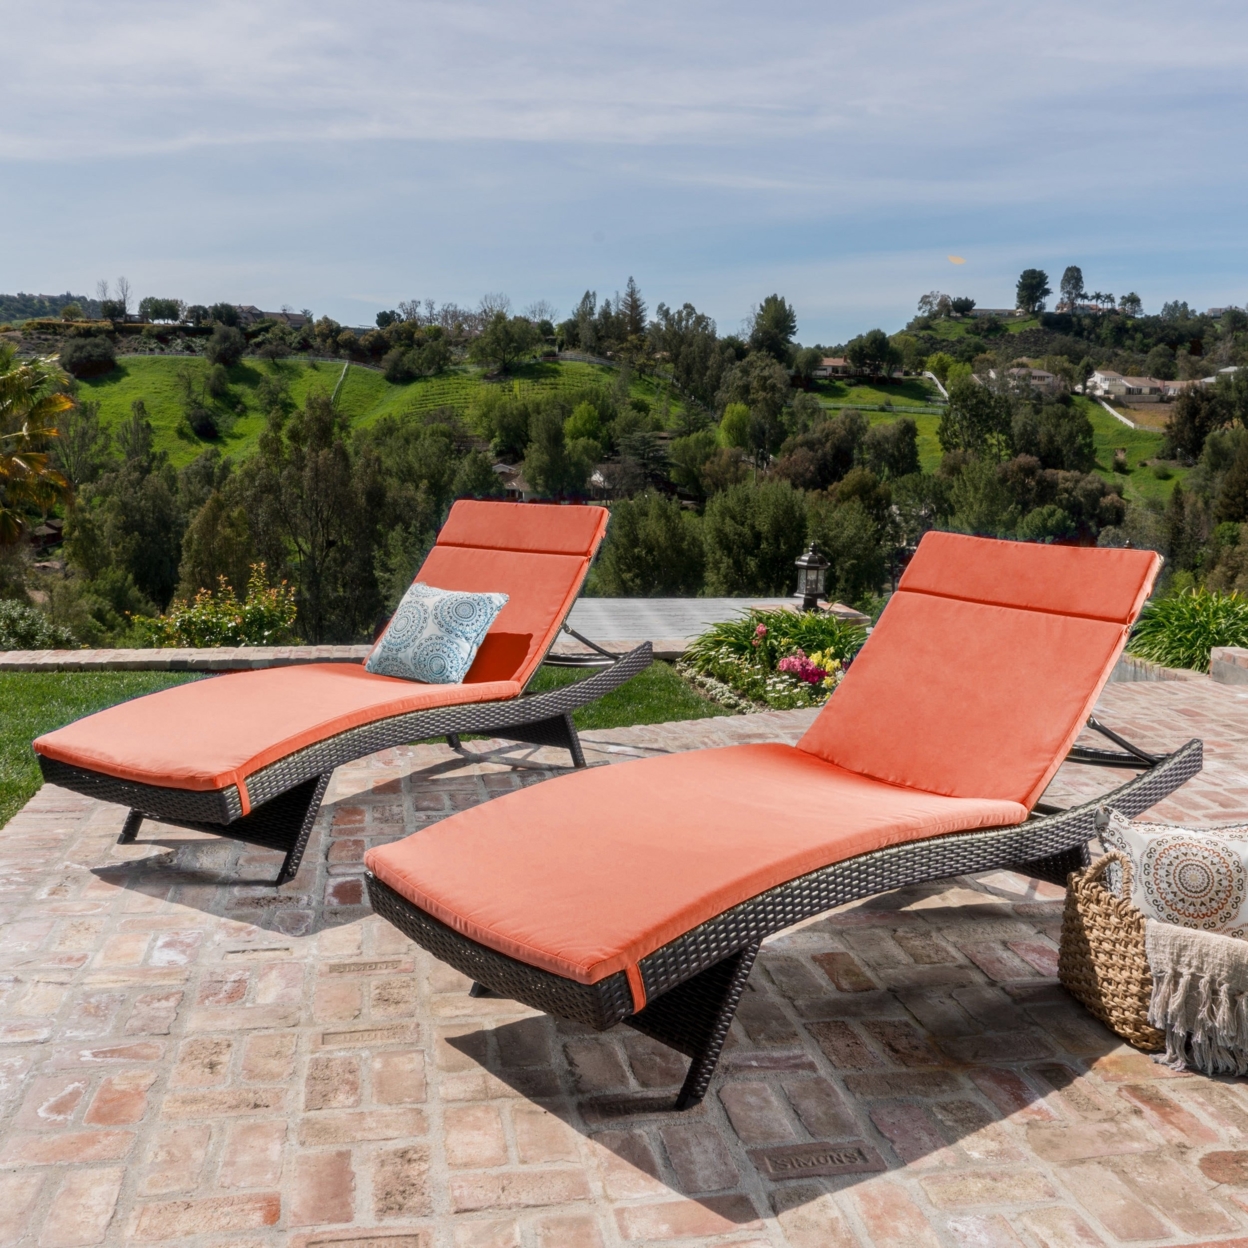 Savana Outdoor Wicker Lounge With Water Resistant Cushion - Gray/orange, Qty Of 2